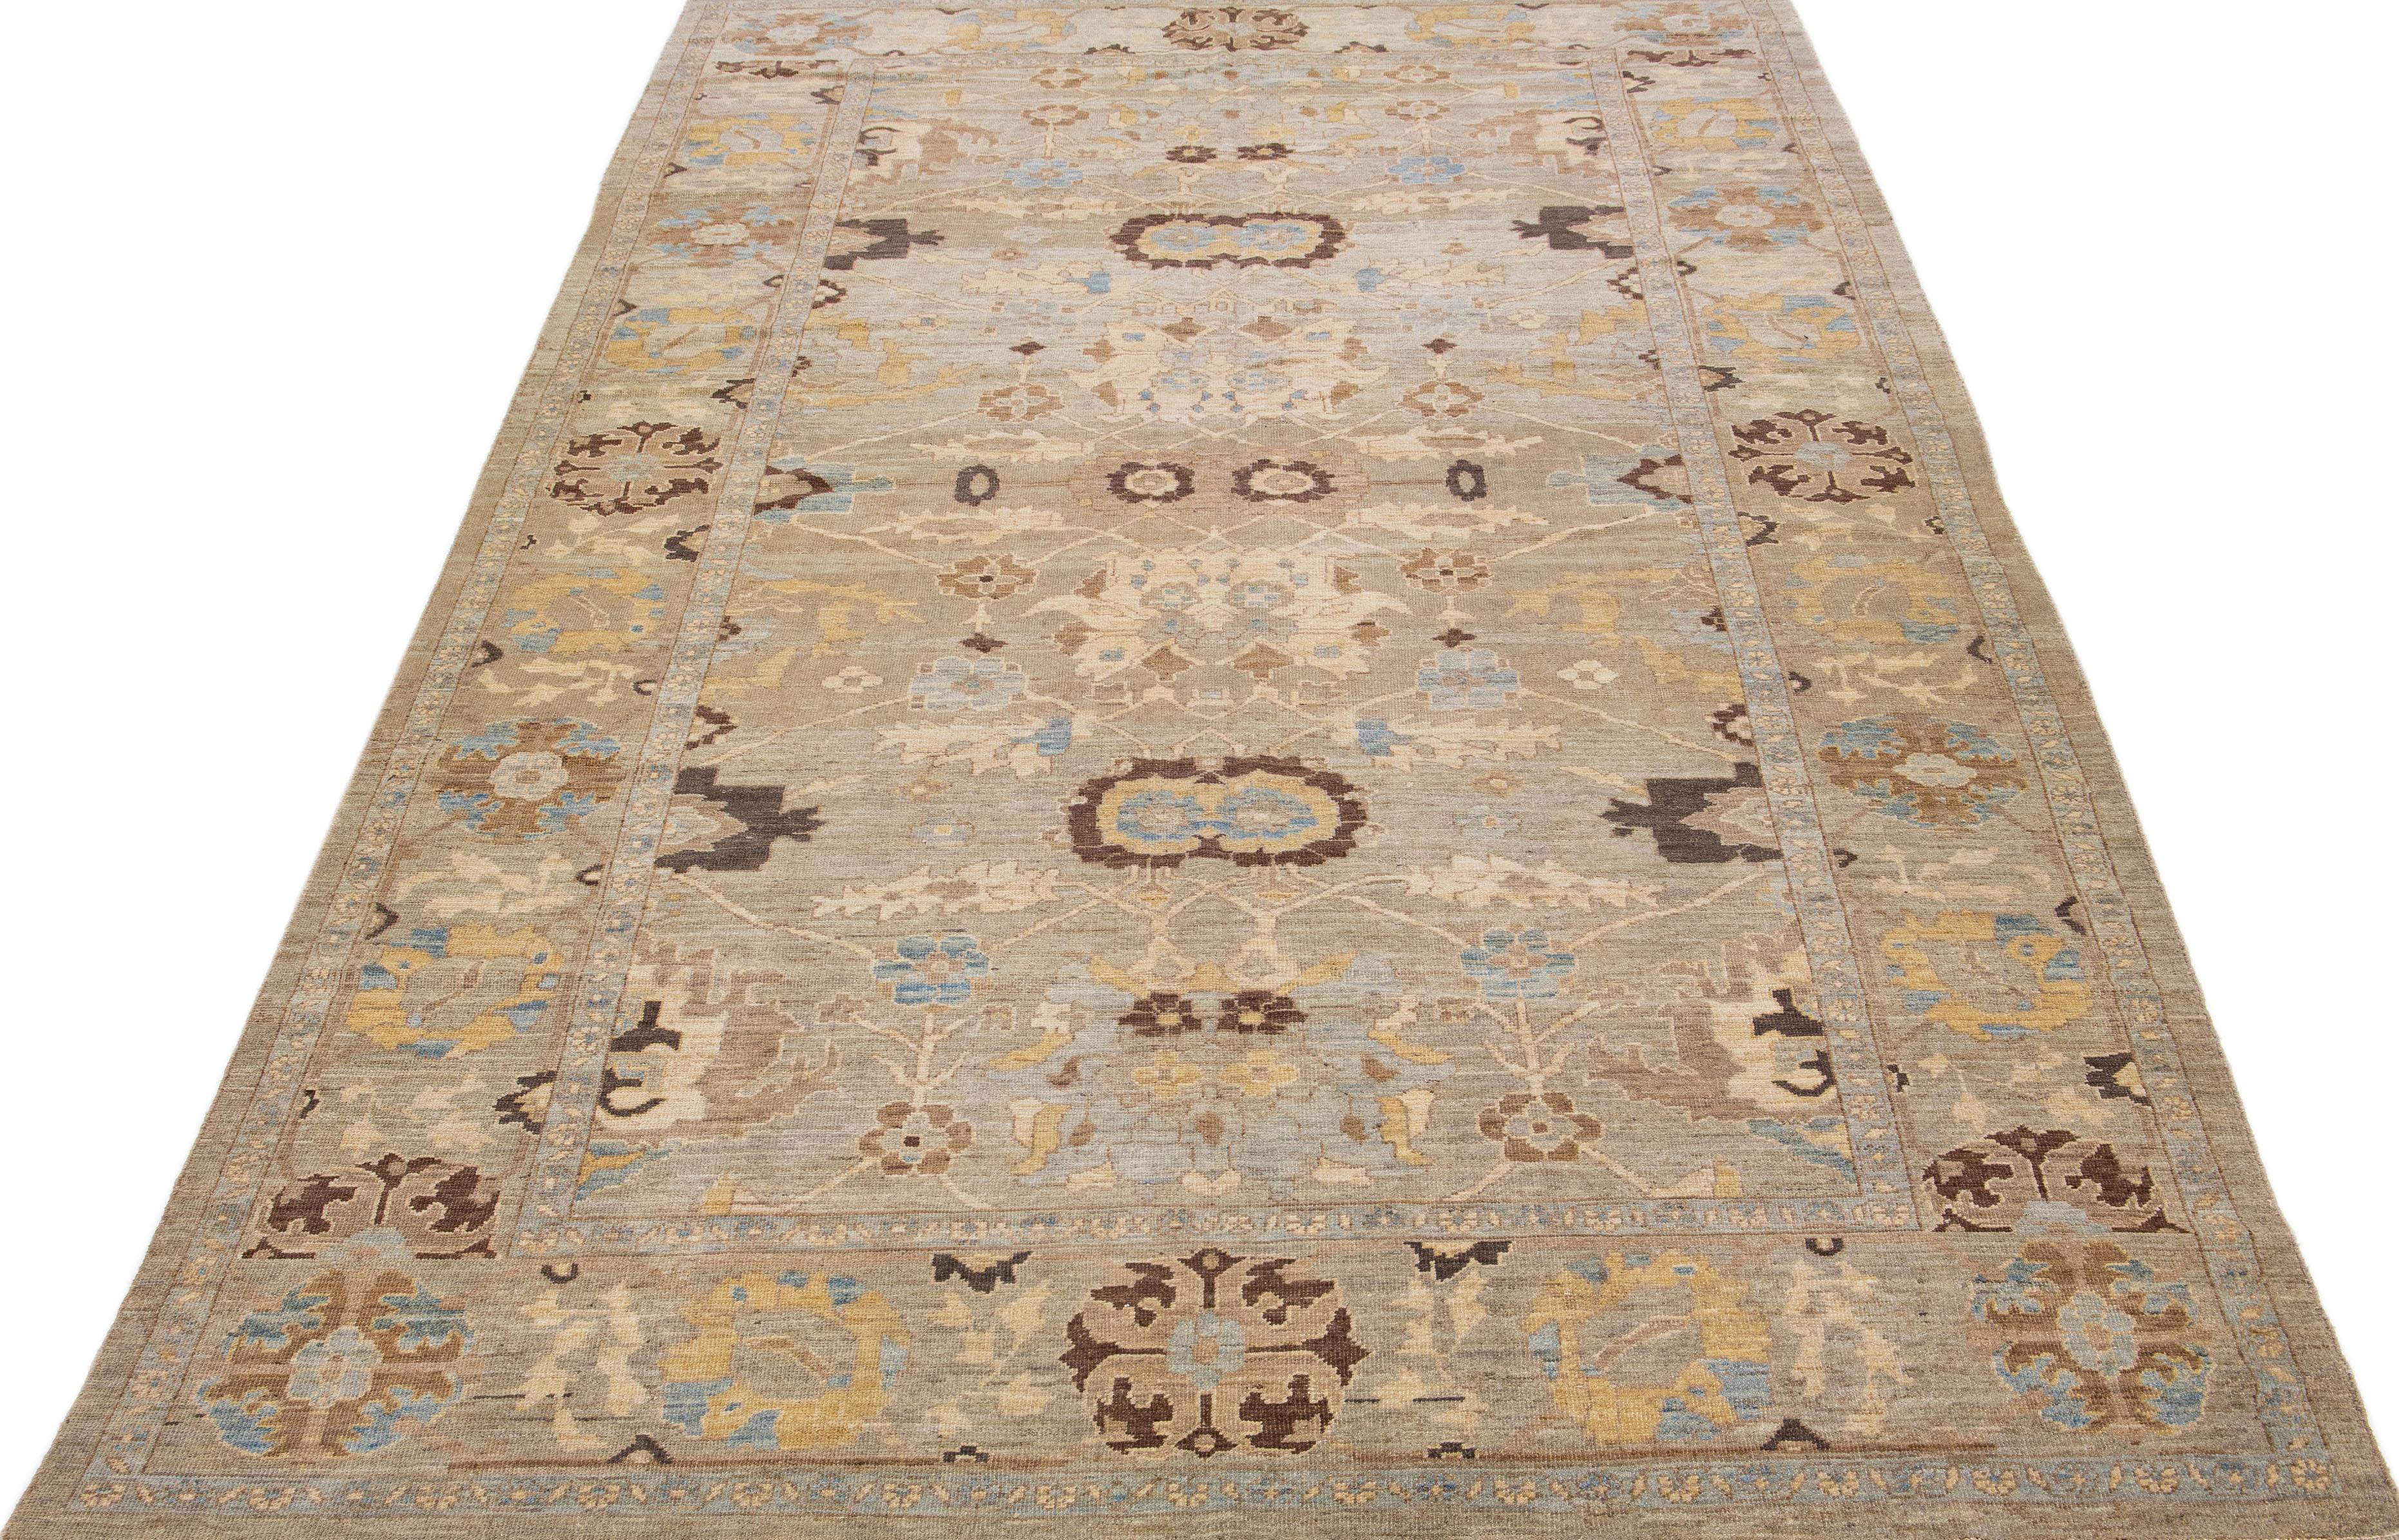 Beautiful Modern Persian Sultanabad hand-knotted wool rug with a brown color field. This Sultanabad rug has accents of beige and blue in an all-over floral design.

This rug measures 8' 8